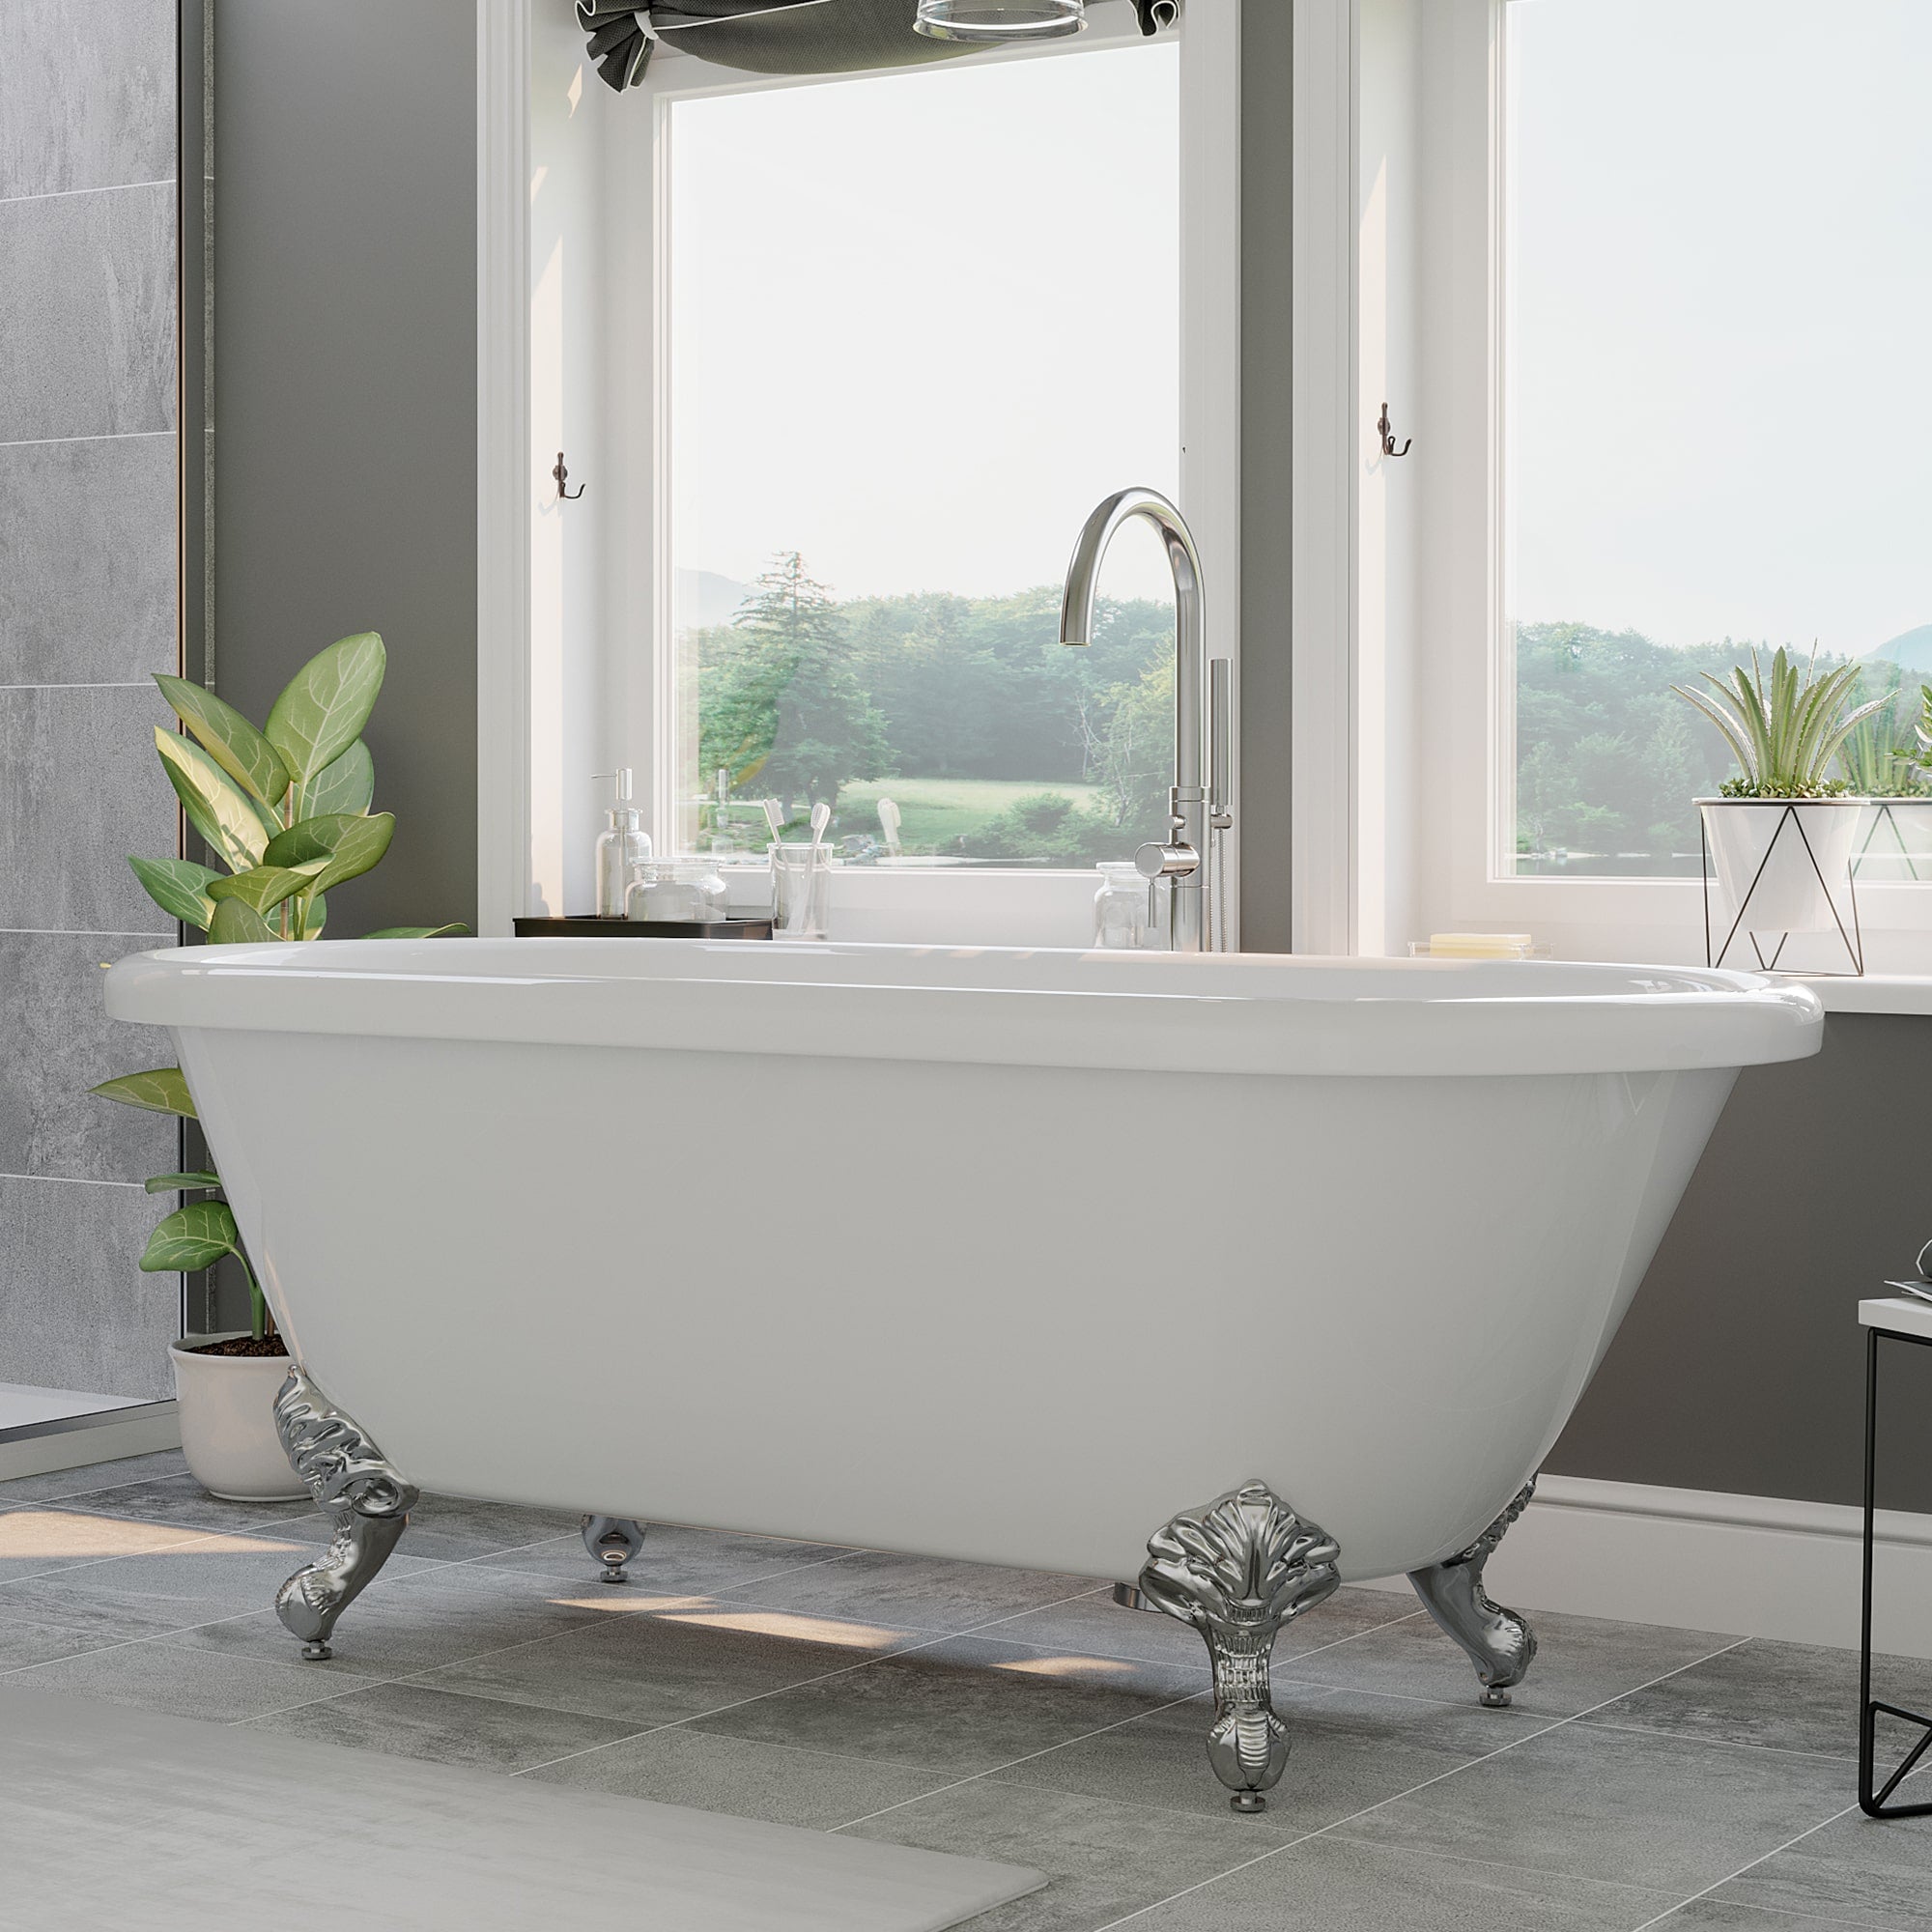 Cambridge Plumbing Double Ended Acrylic Clawfoot Soaking Tub (White Gloss Finish) and Complete Plumbing Package ADE-150-PKG-NH - with brushed nickel ball and claw feet and brushed nickel plumbing package - in bathroom setting - Vital Hydrotherapy